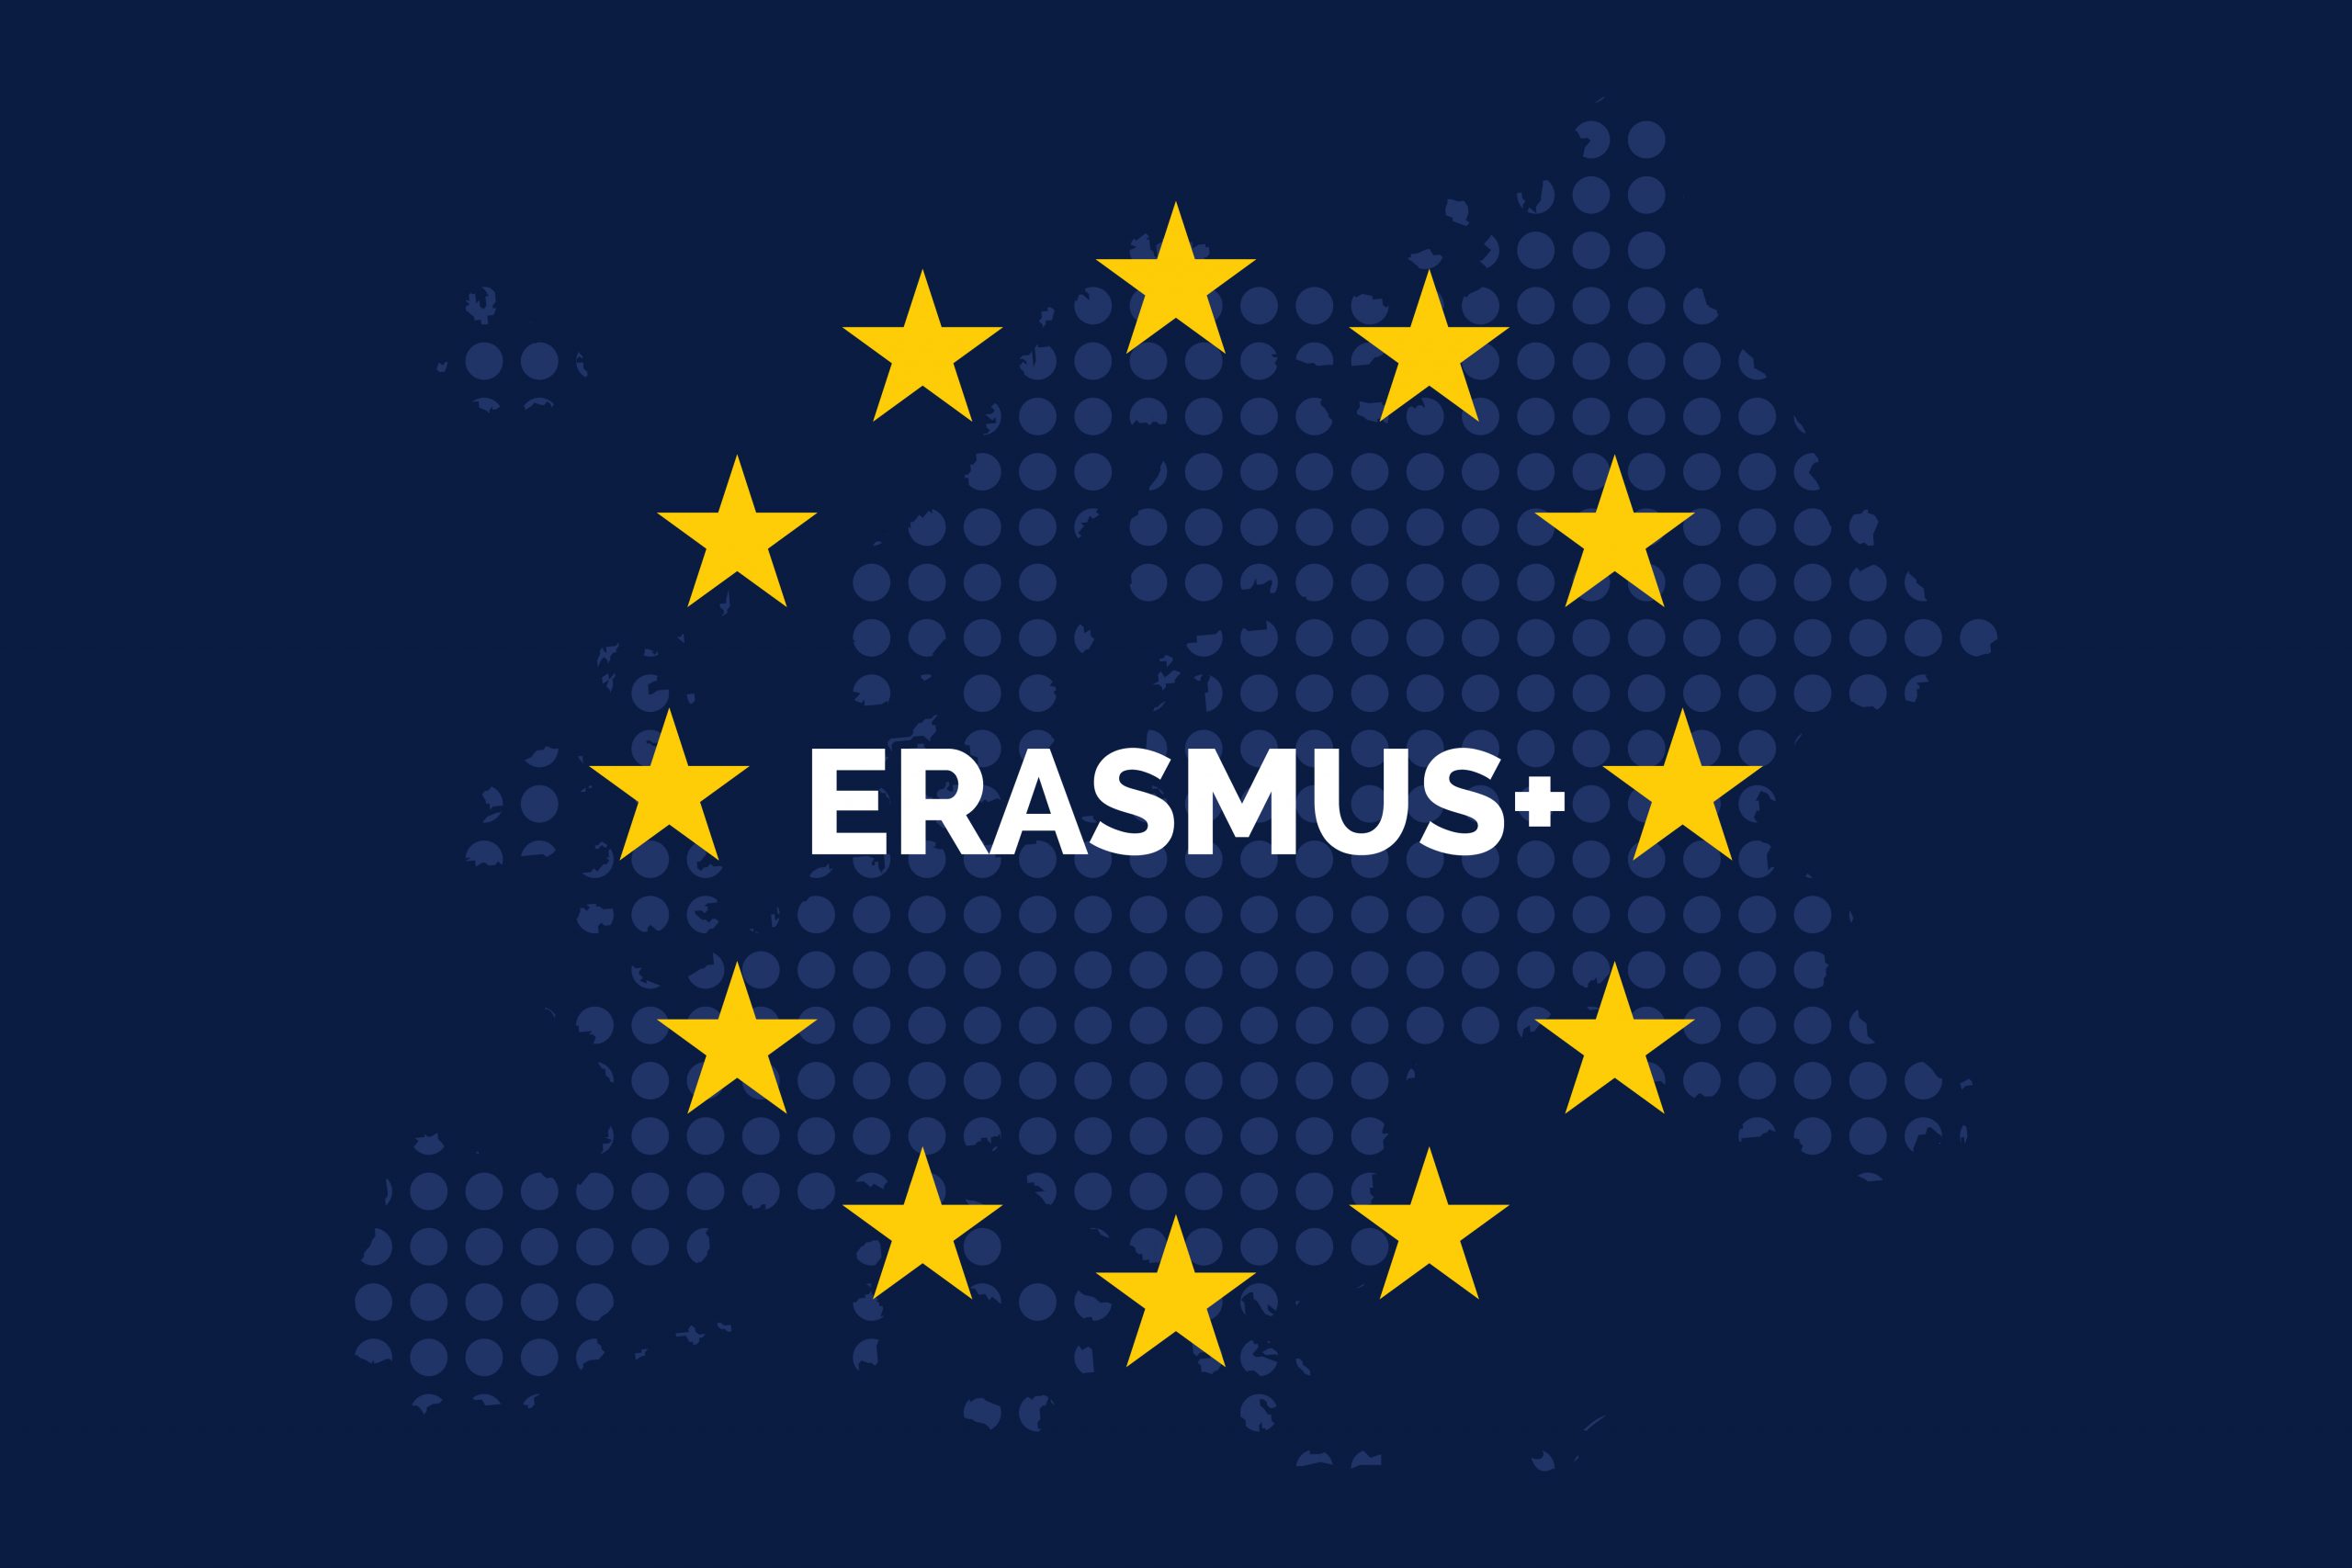 What are the Erasmus Program and the Erasmus+?